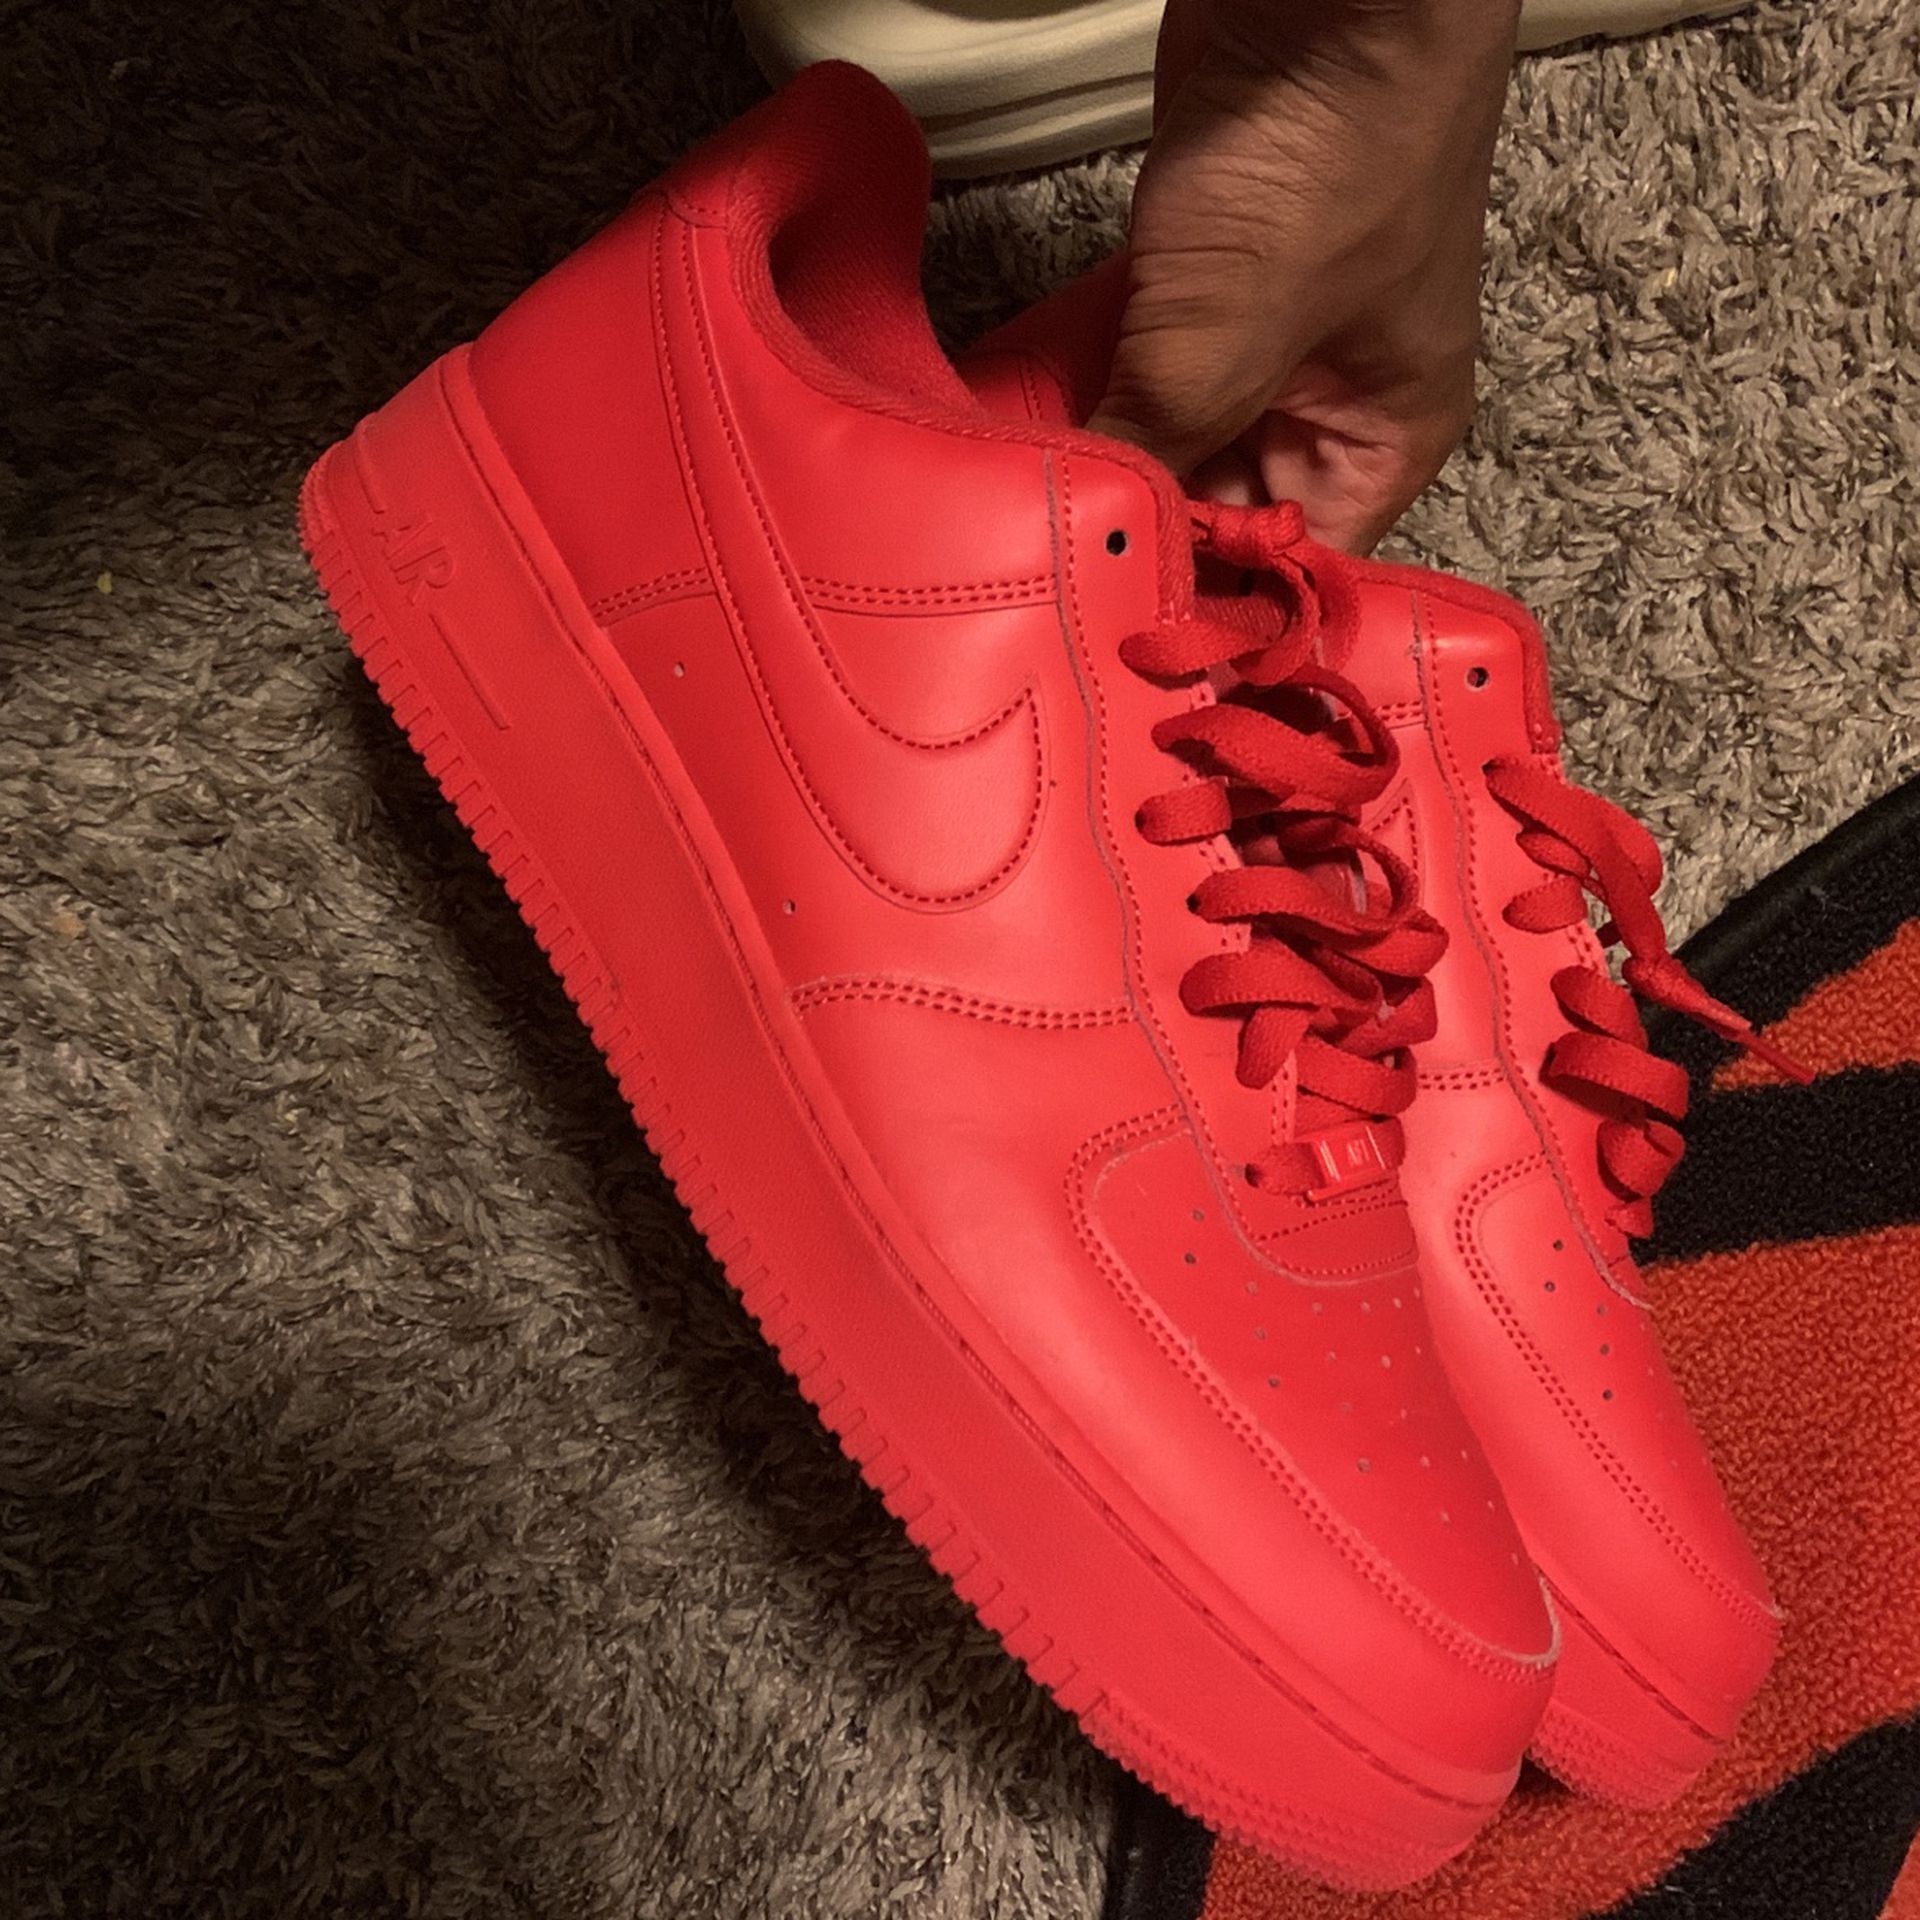 red af1 for Sale in Federal Way, WA - OfferUp